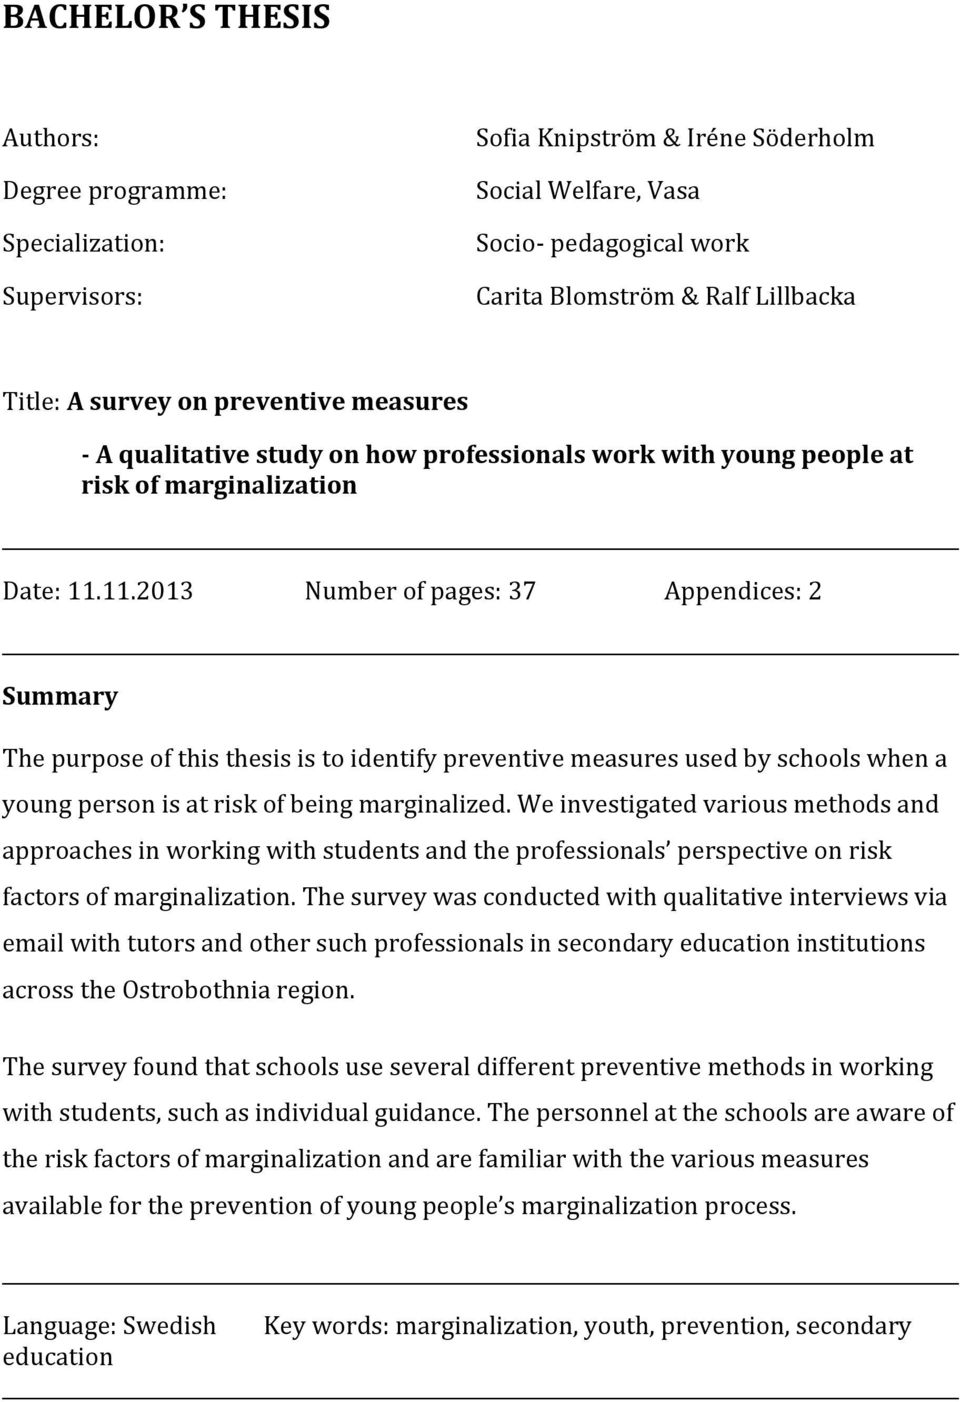 11.2013 Number of pages: 37 Appendices: 2 Summary The purpose of this thesis is to identify preventive measures used by schools when a young person is at risk of being marginalized.